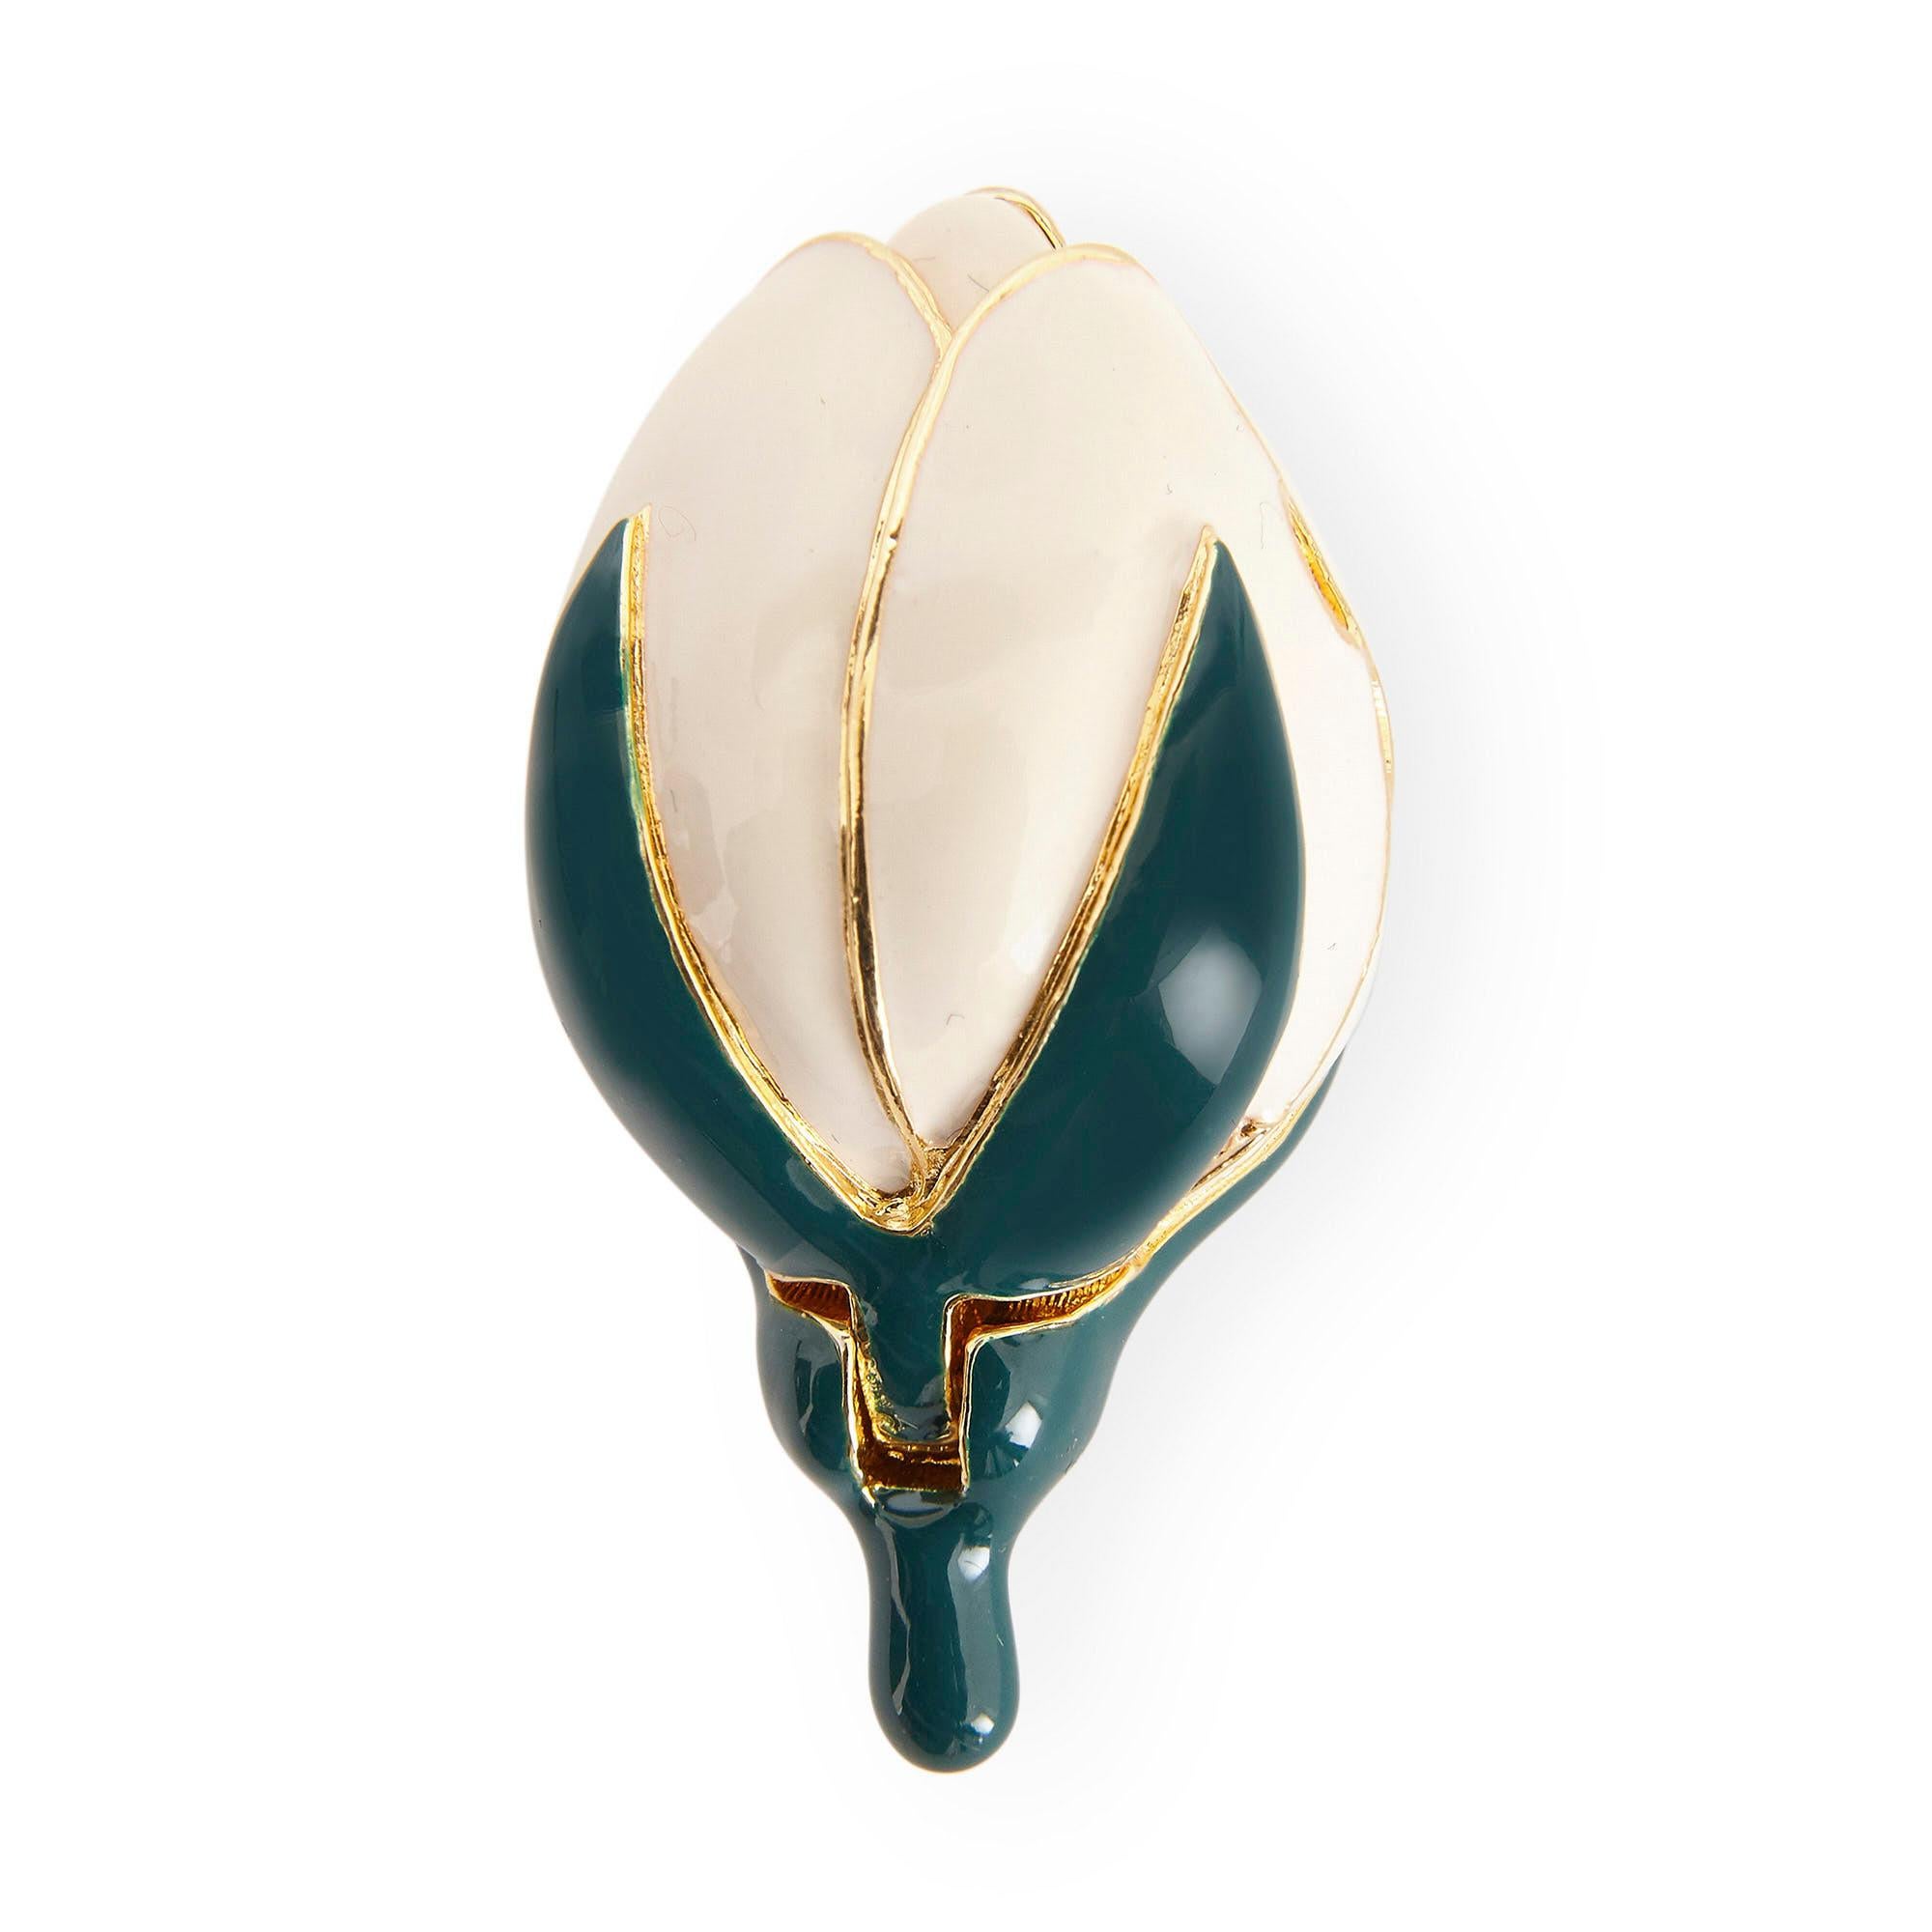 Metal Contemporary Fabergé Easter Egg with Green Guilloché Enamel and Gemstones